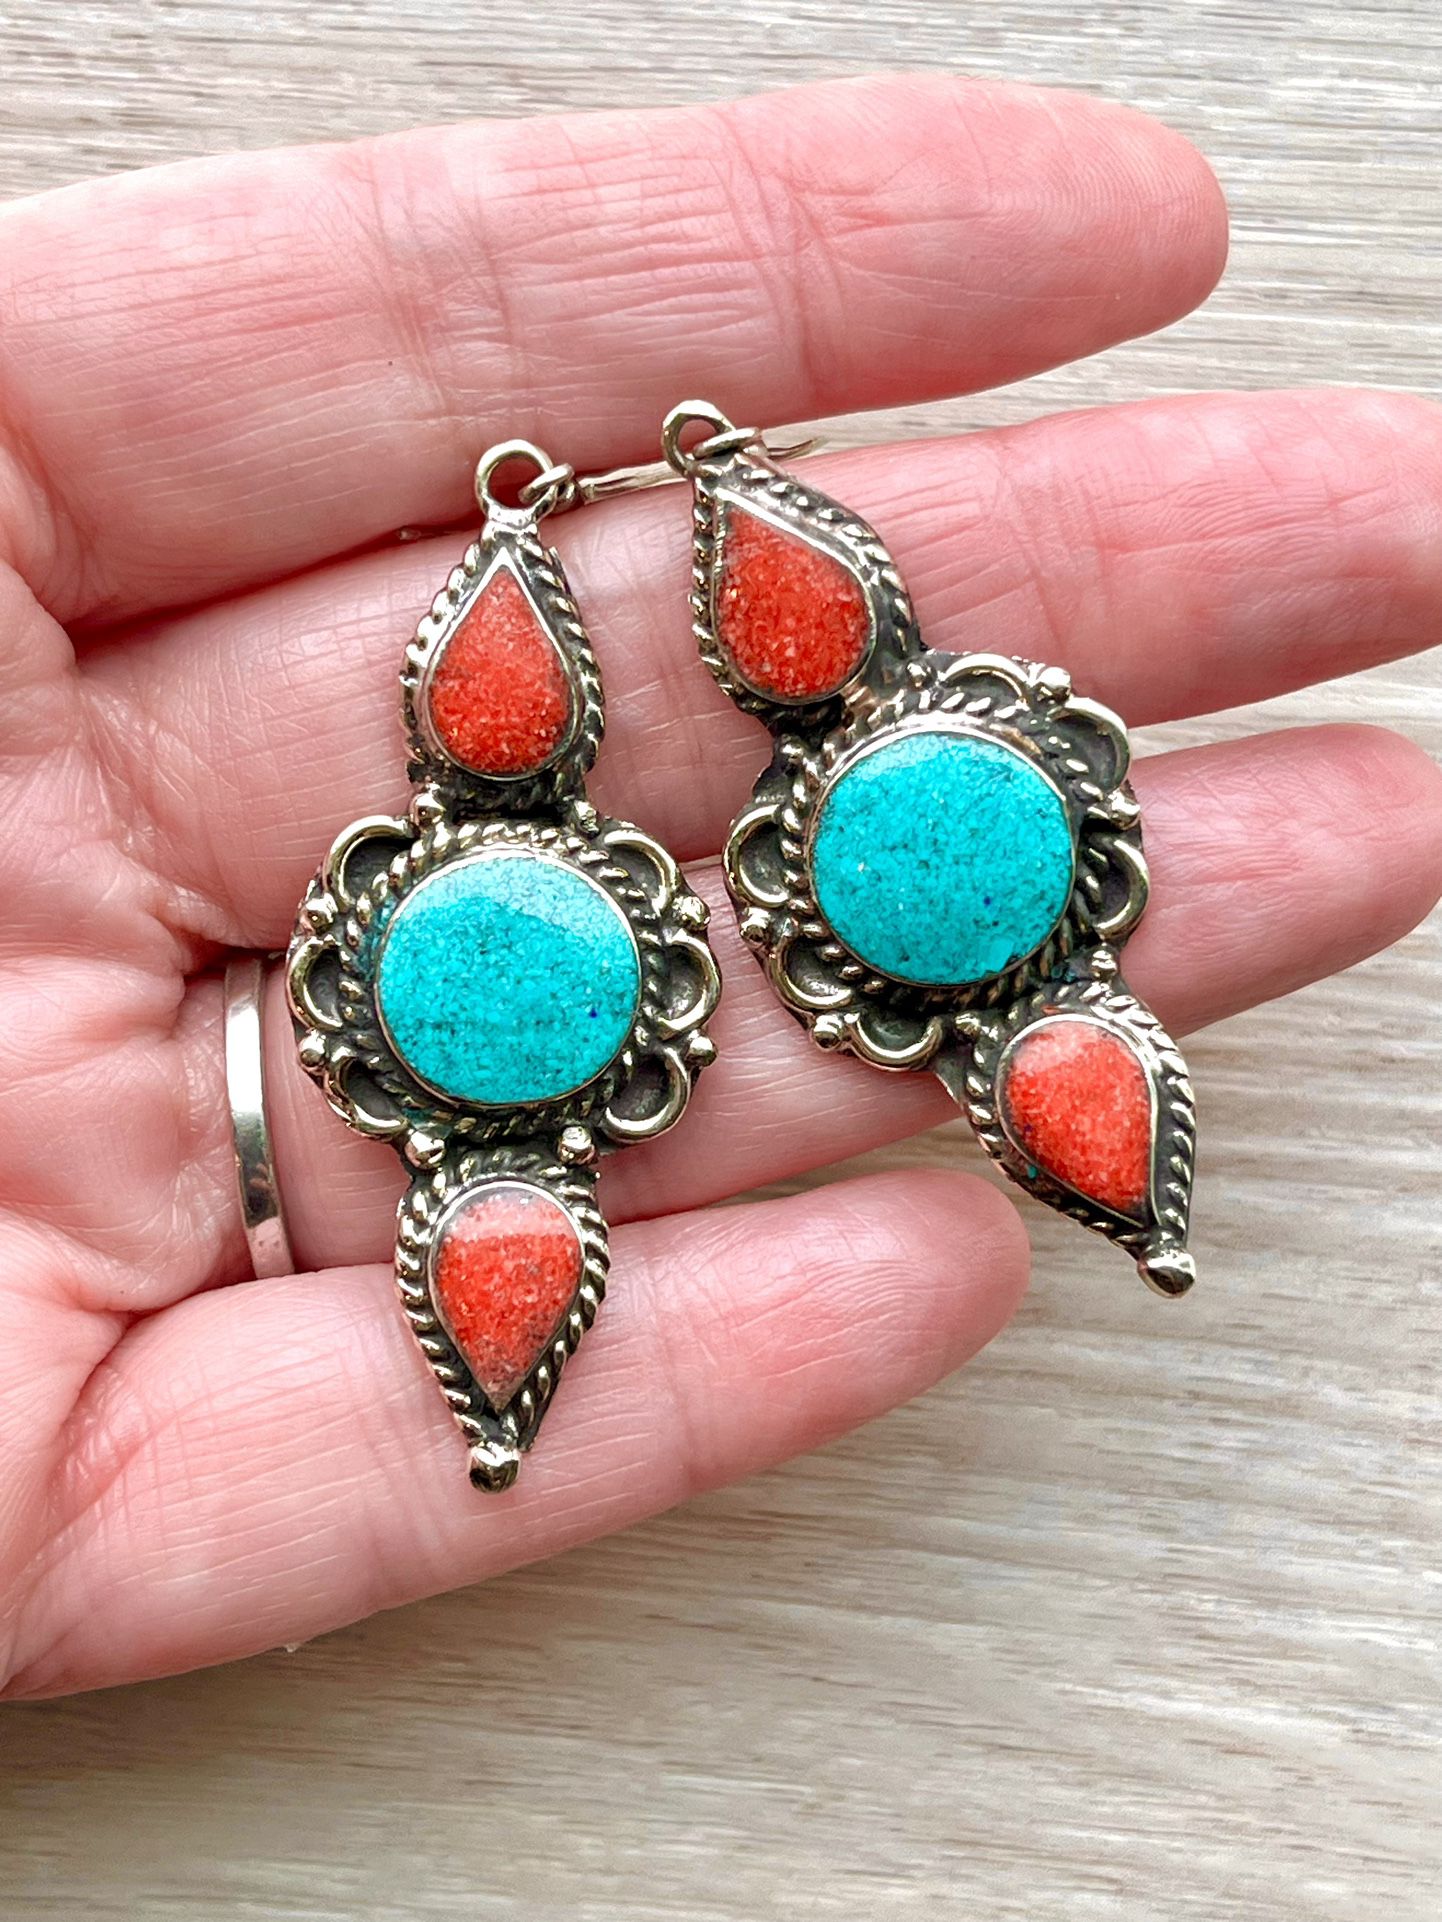 Southwest Tibetan Silver Natural Crushed Turquoise & Coral 2” Earrings